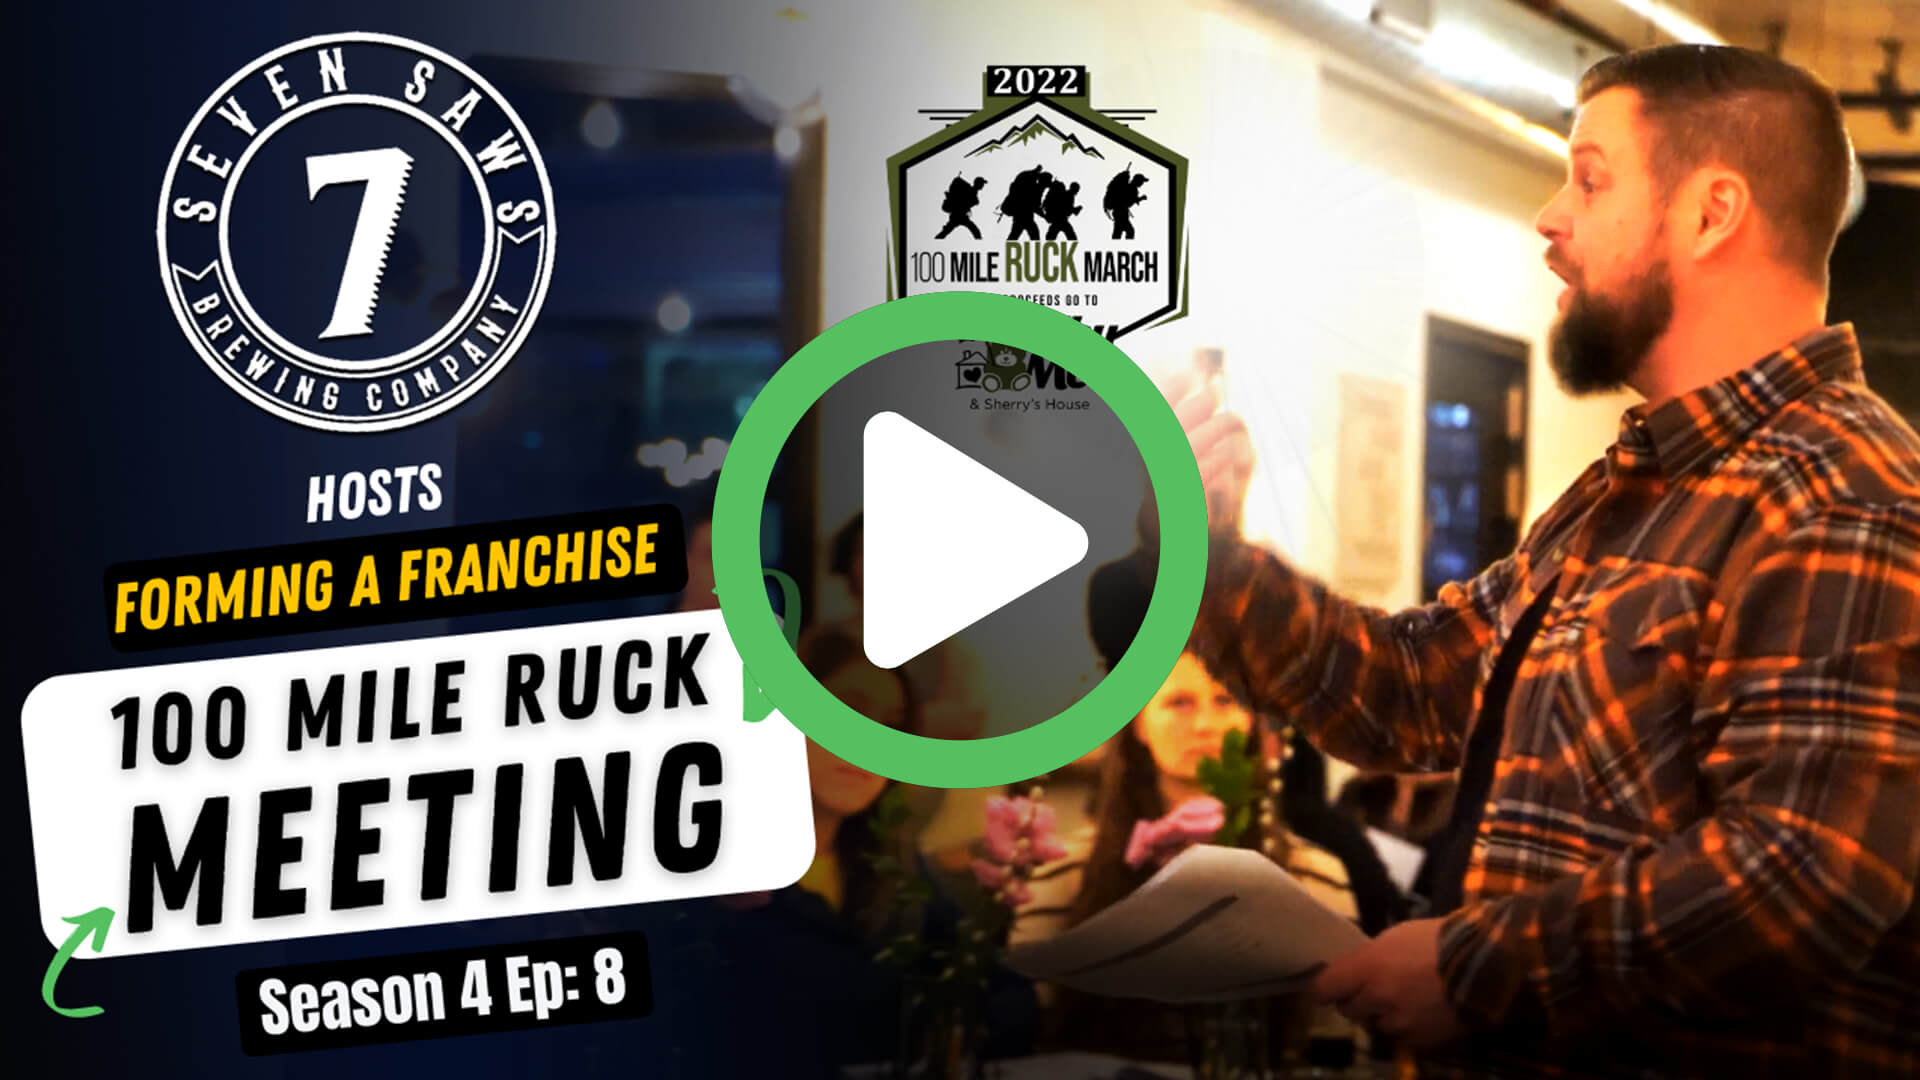 S4 EP8: 100 Mile Ruck March - Athletes Meeting